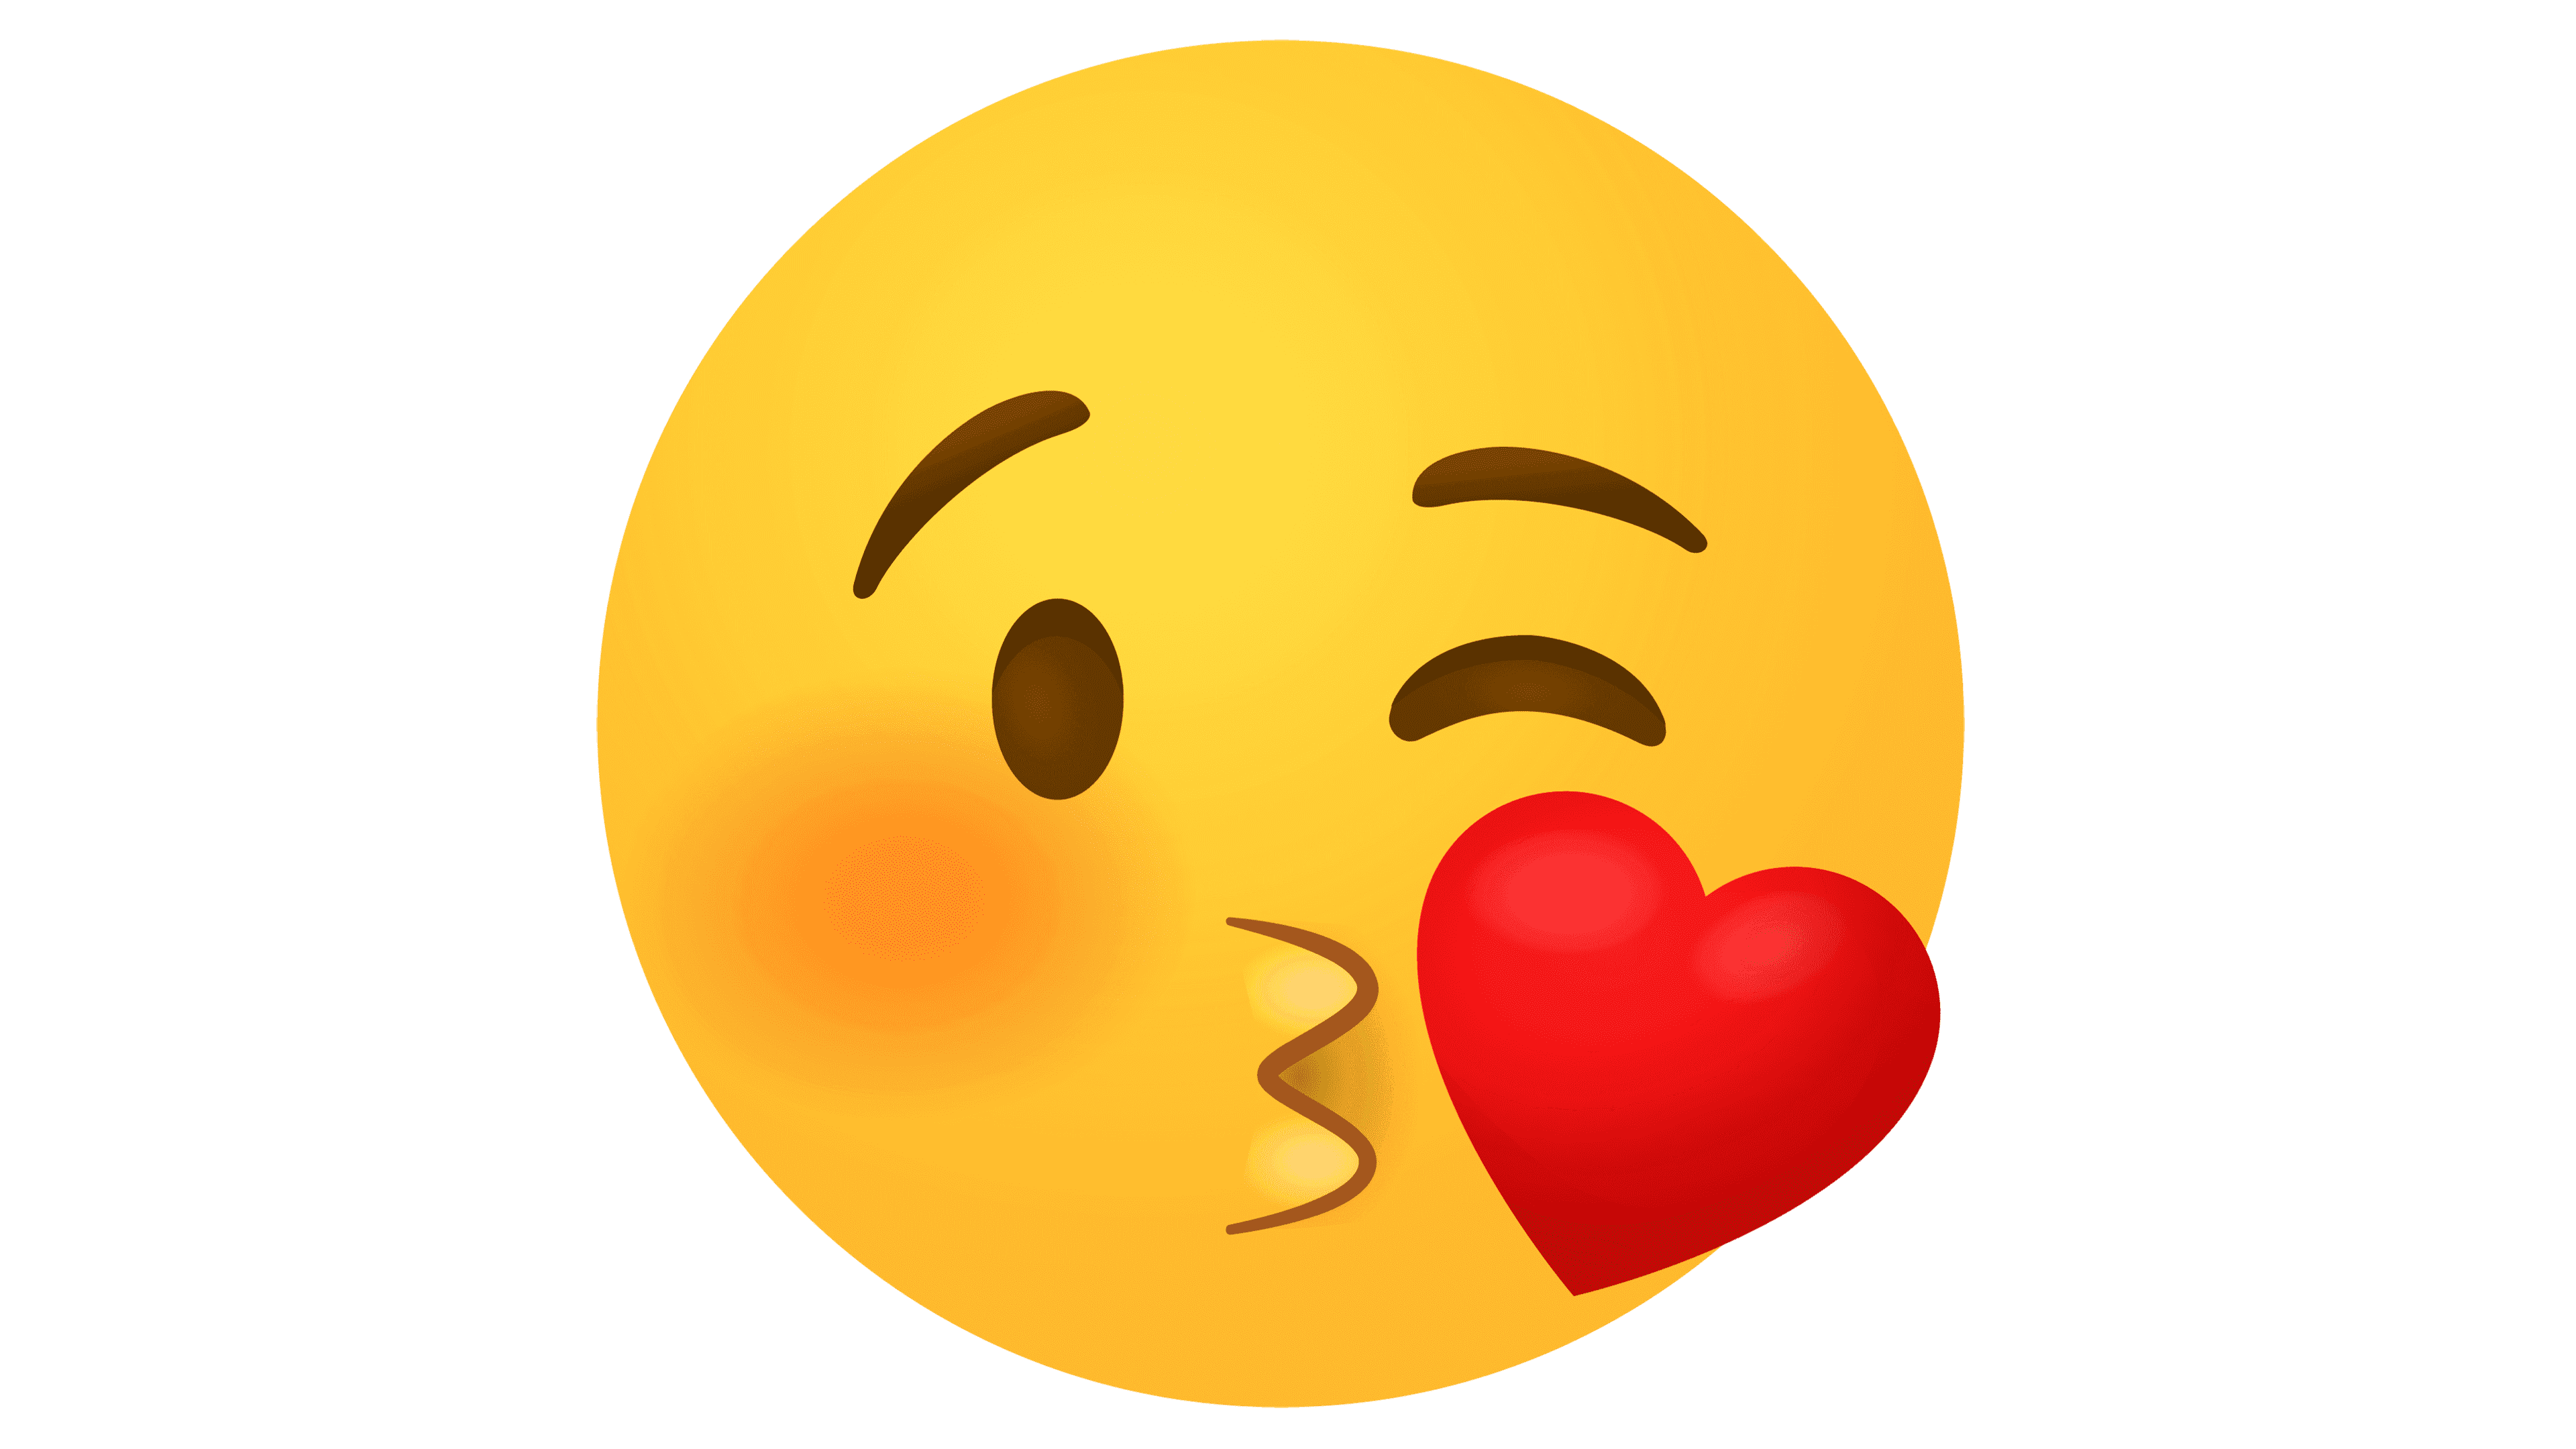 Kiss Emoji - what it means and how to use it.